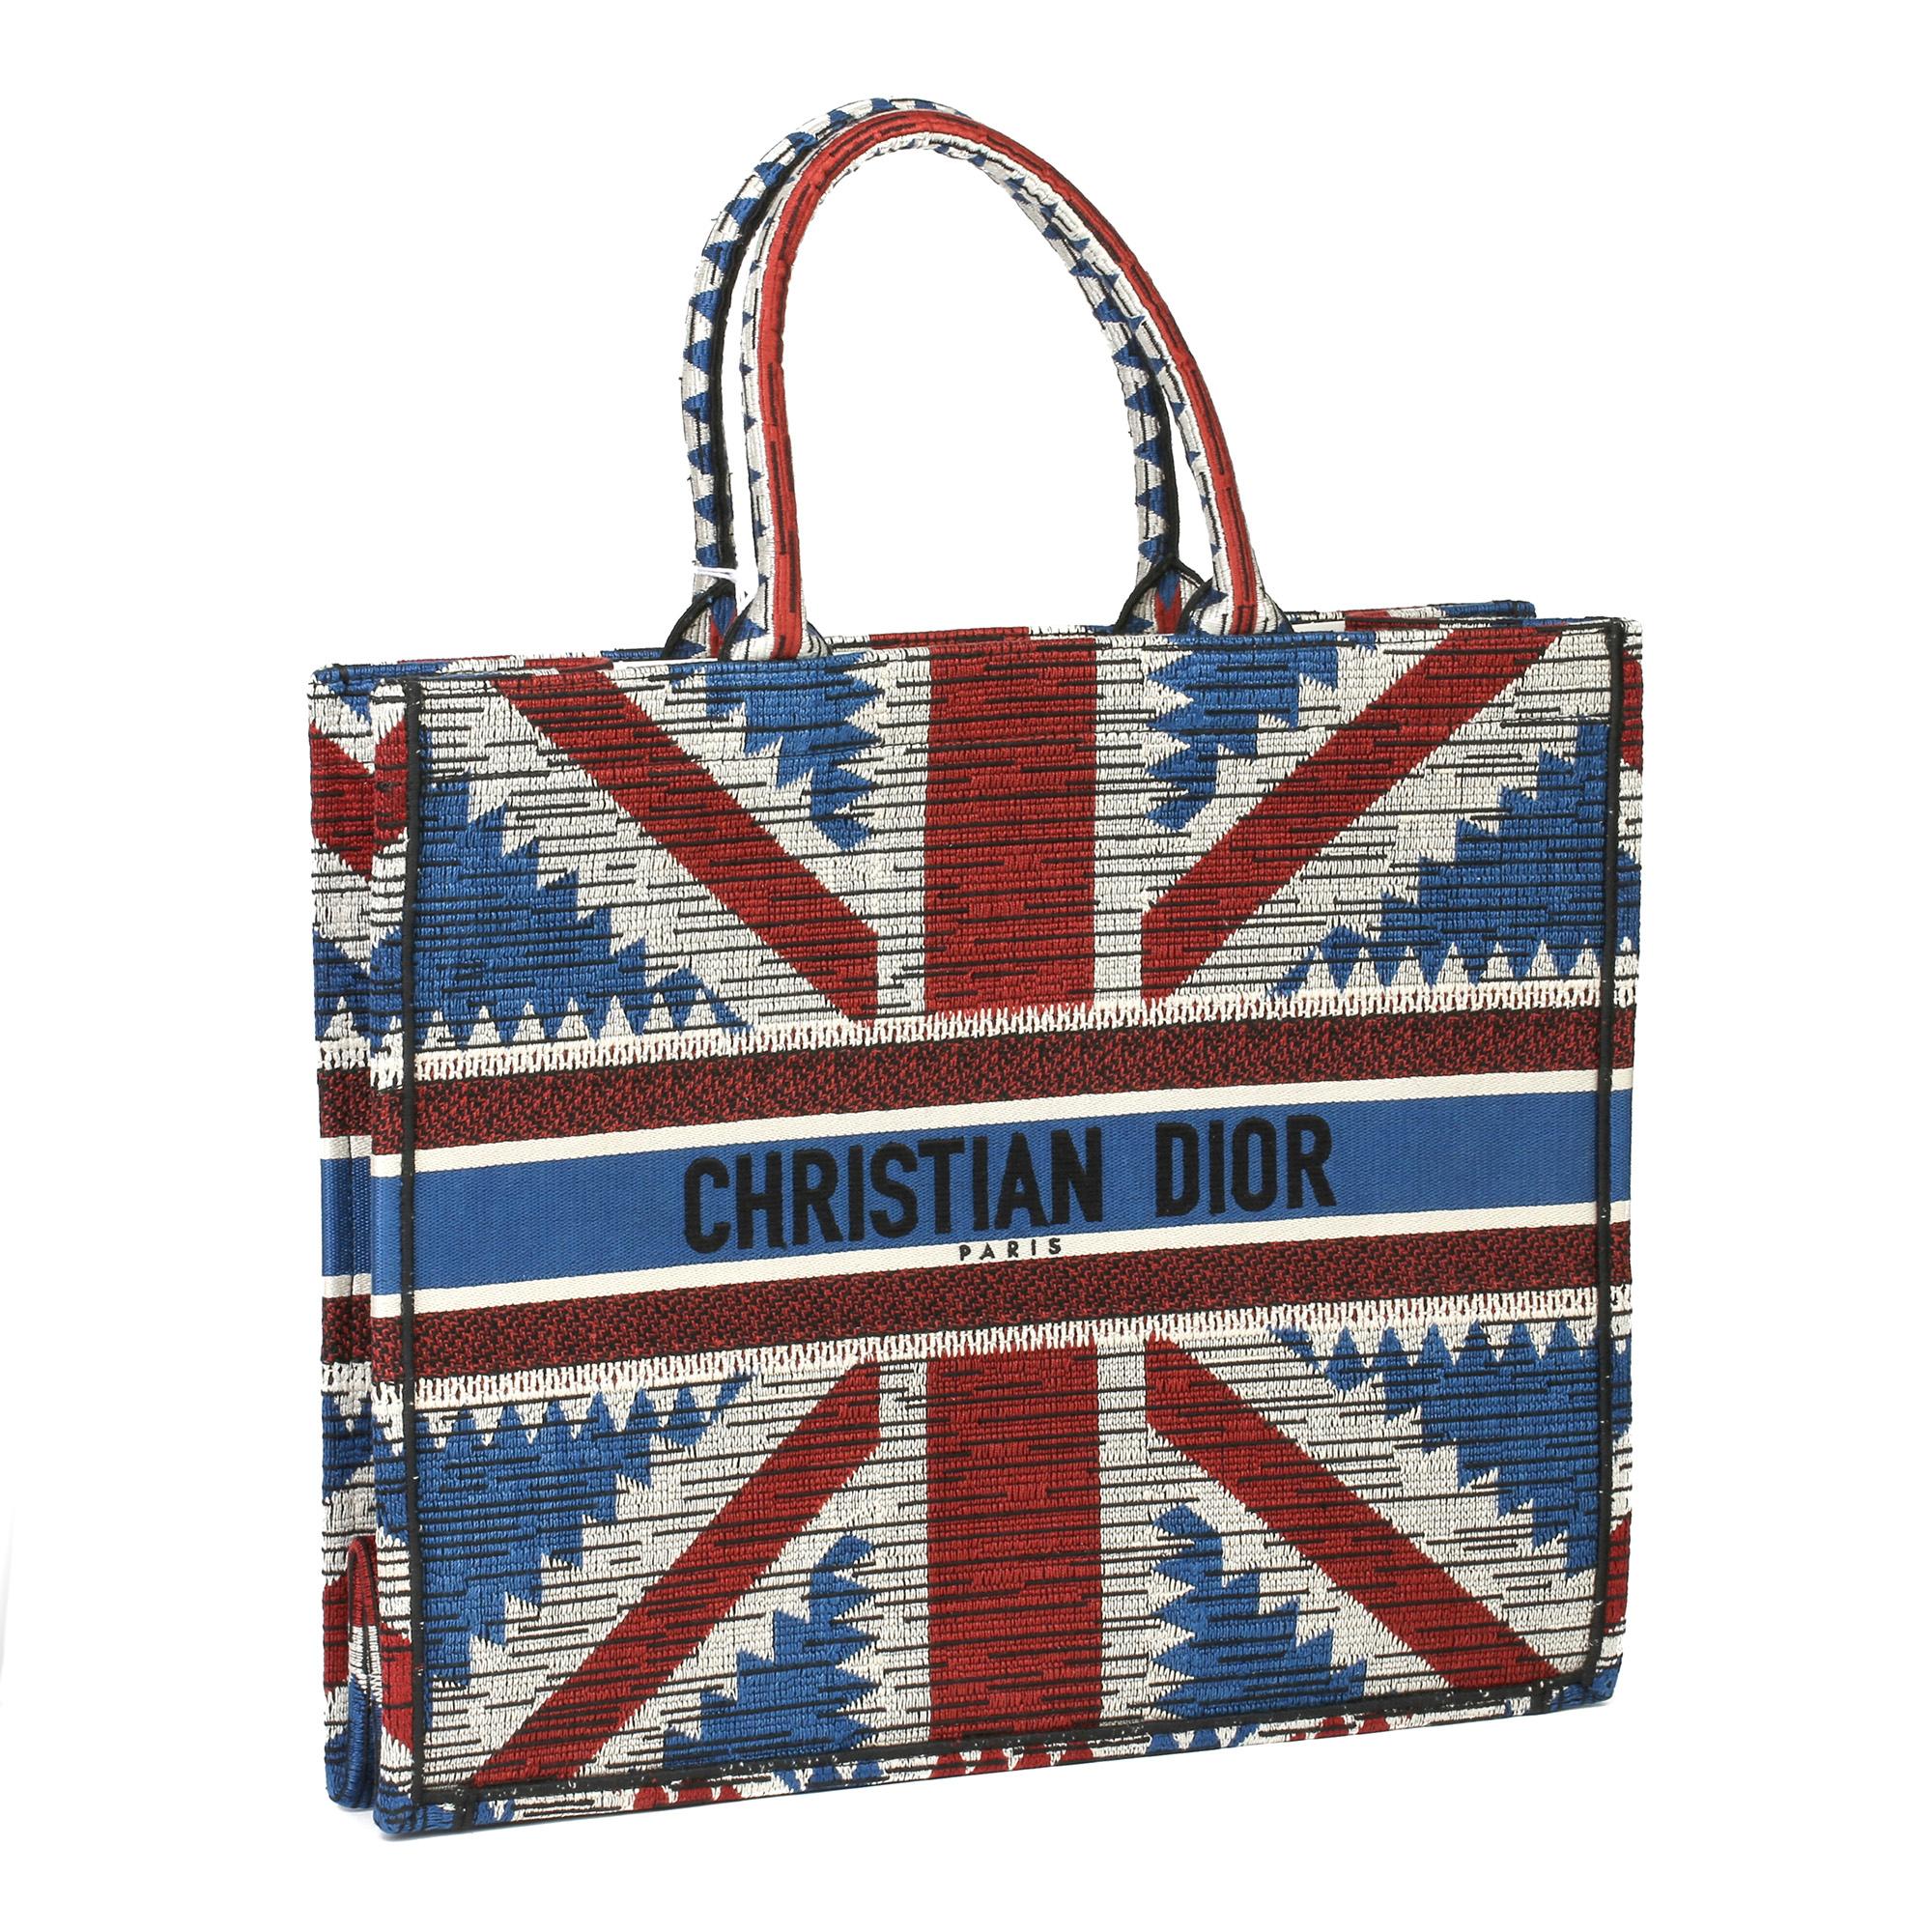 CHRISTIAN DIOR
Red, White & Blue Canvas Union Jack Book Tote

Xupes Reference: CB332
Serial Number: 50-MA-0159X
Age (Circa): 2019
Accompanied By: Christian Dior Dust Bag, Authenticity Card, Care Booklet 
Authenticity Details: Authenticity Card, Date